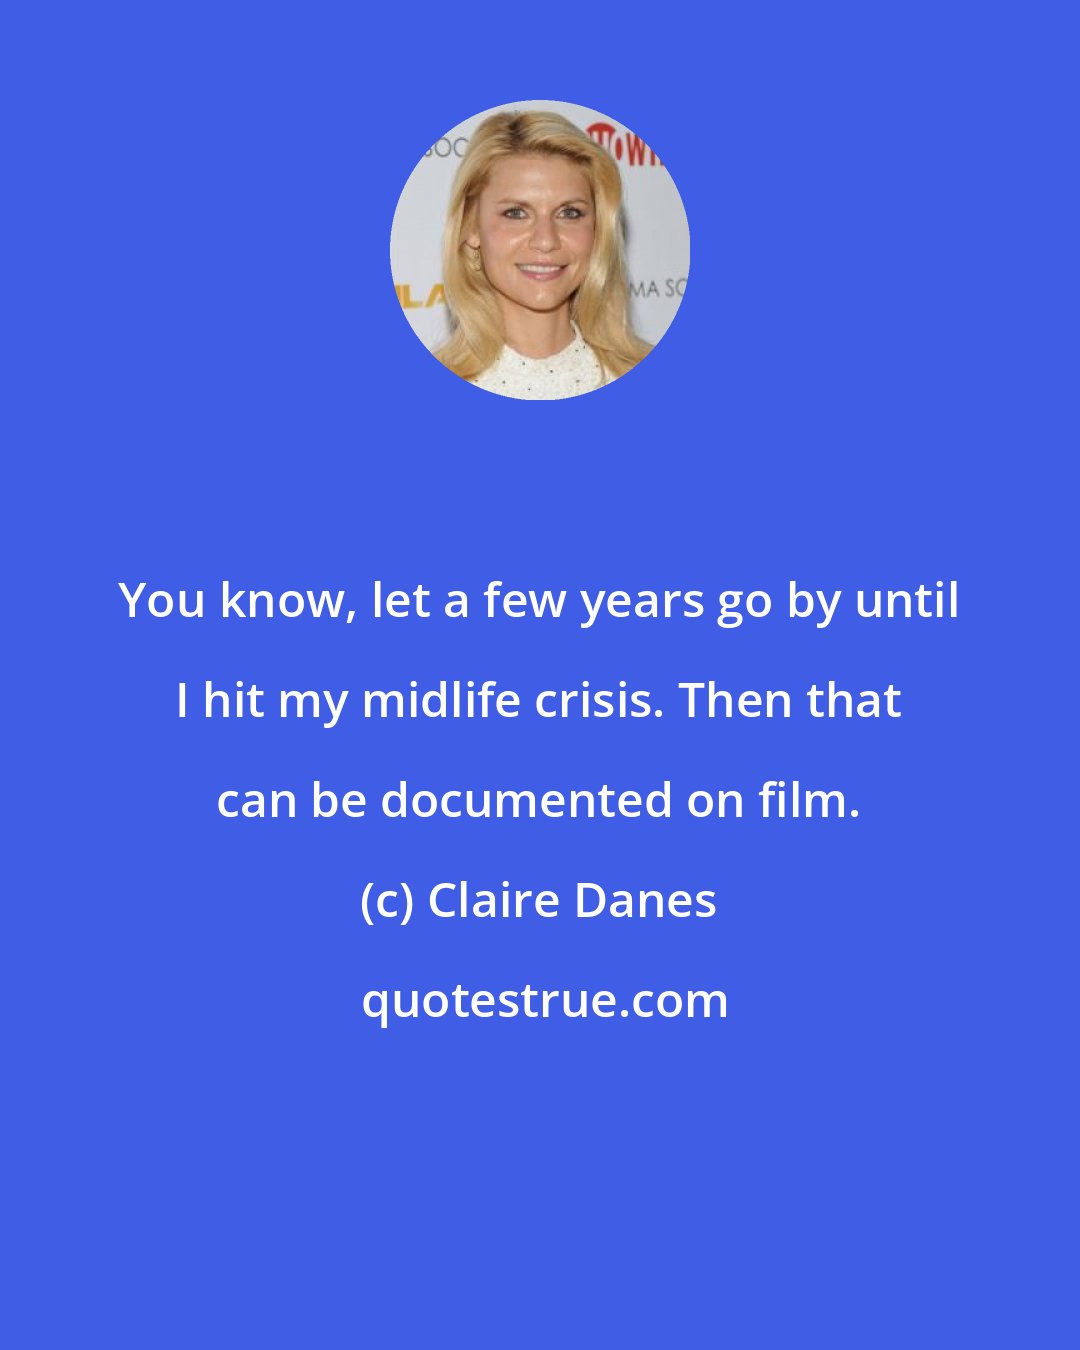 Claire Danes: You know, let a few years go by until I hit my midlife crisis. Then that can be documented on film.